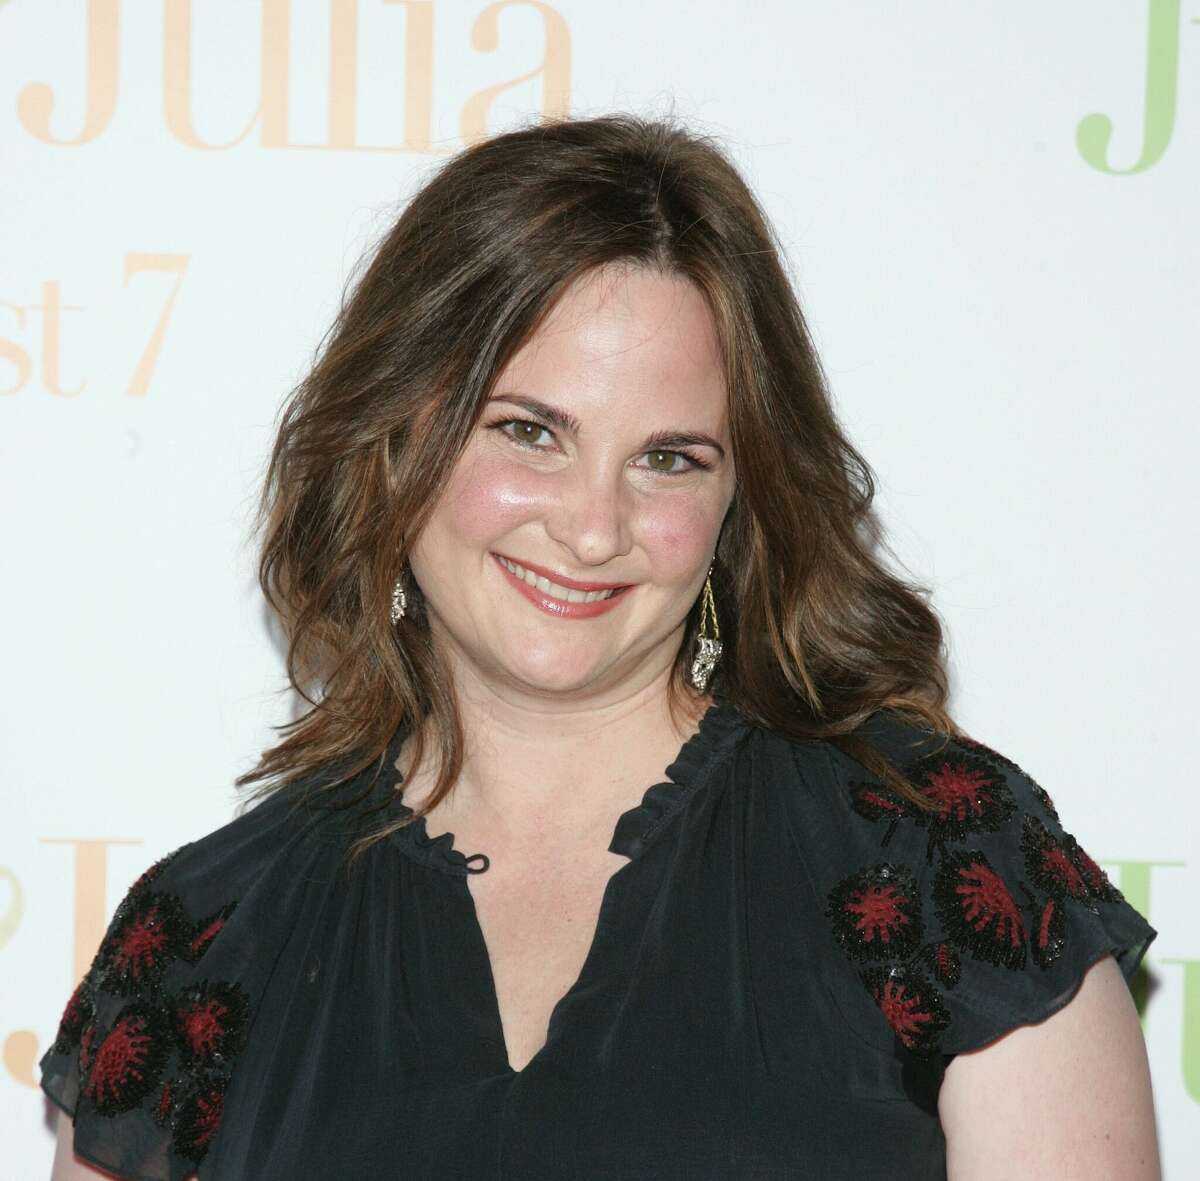 Writer Julie Powell attends the Julie & Julia premiere at the Ziegfeld Theatre on July 30, 2009 in New York City. (Photo by Jim Spellman/WireImage)